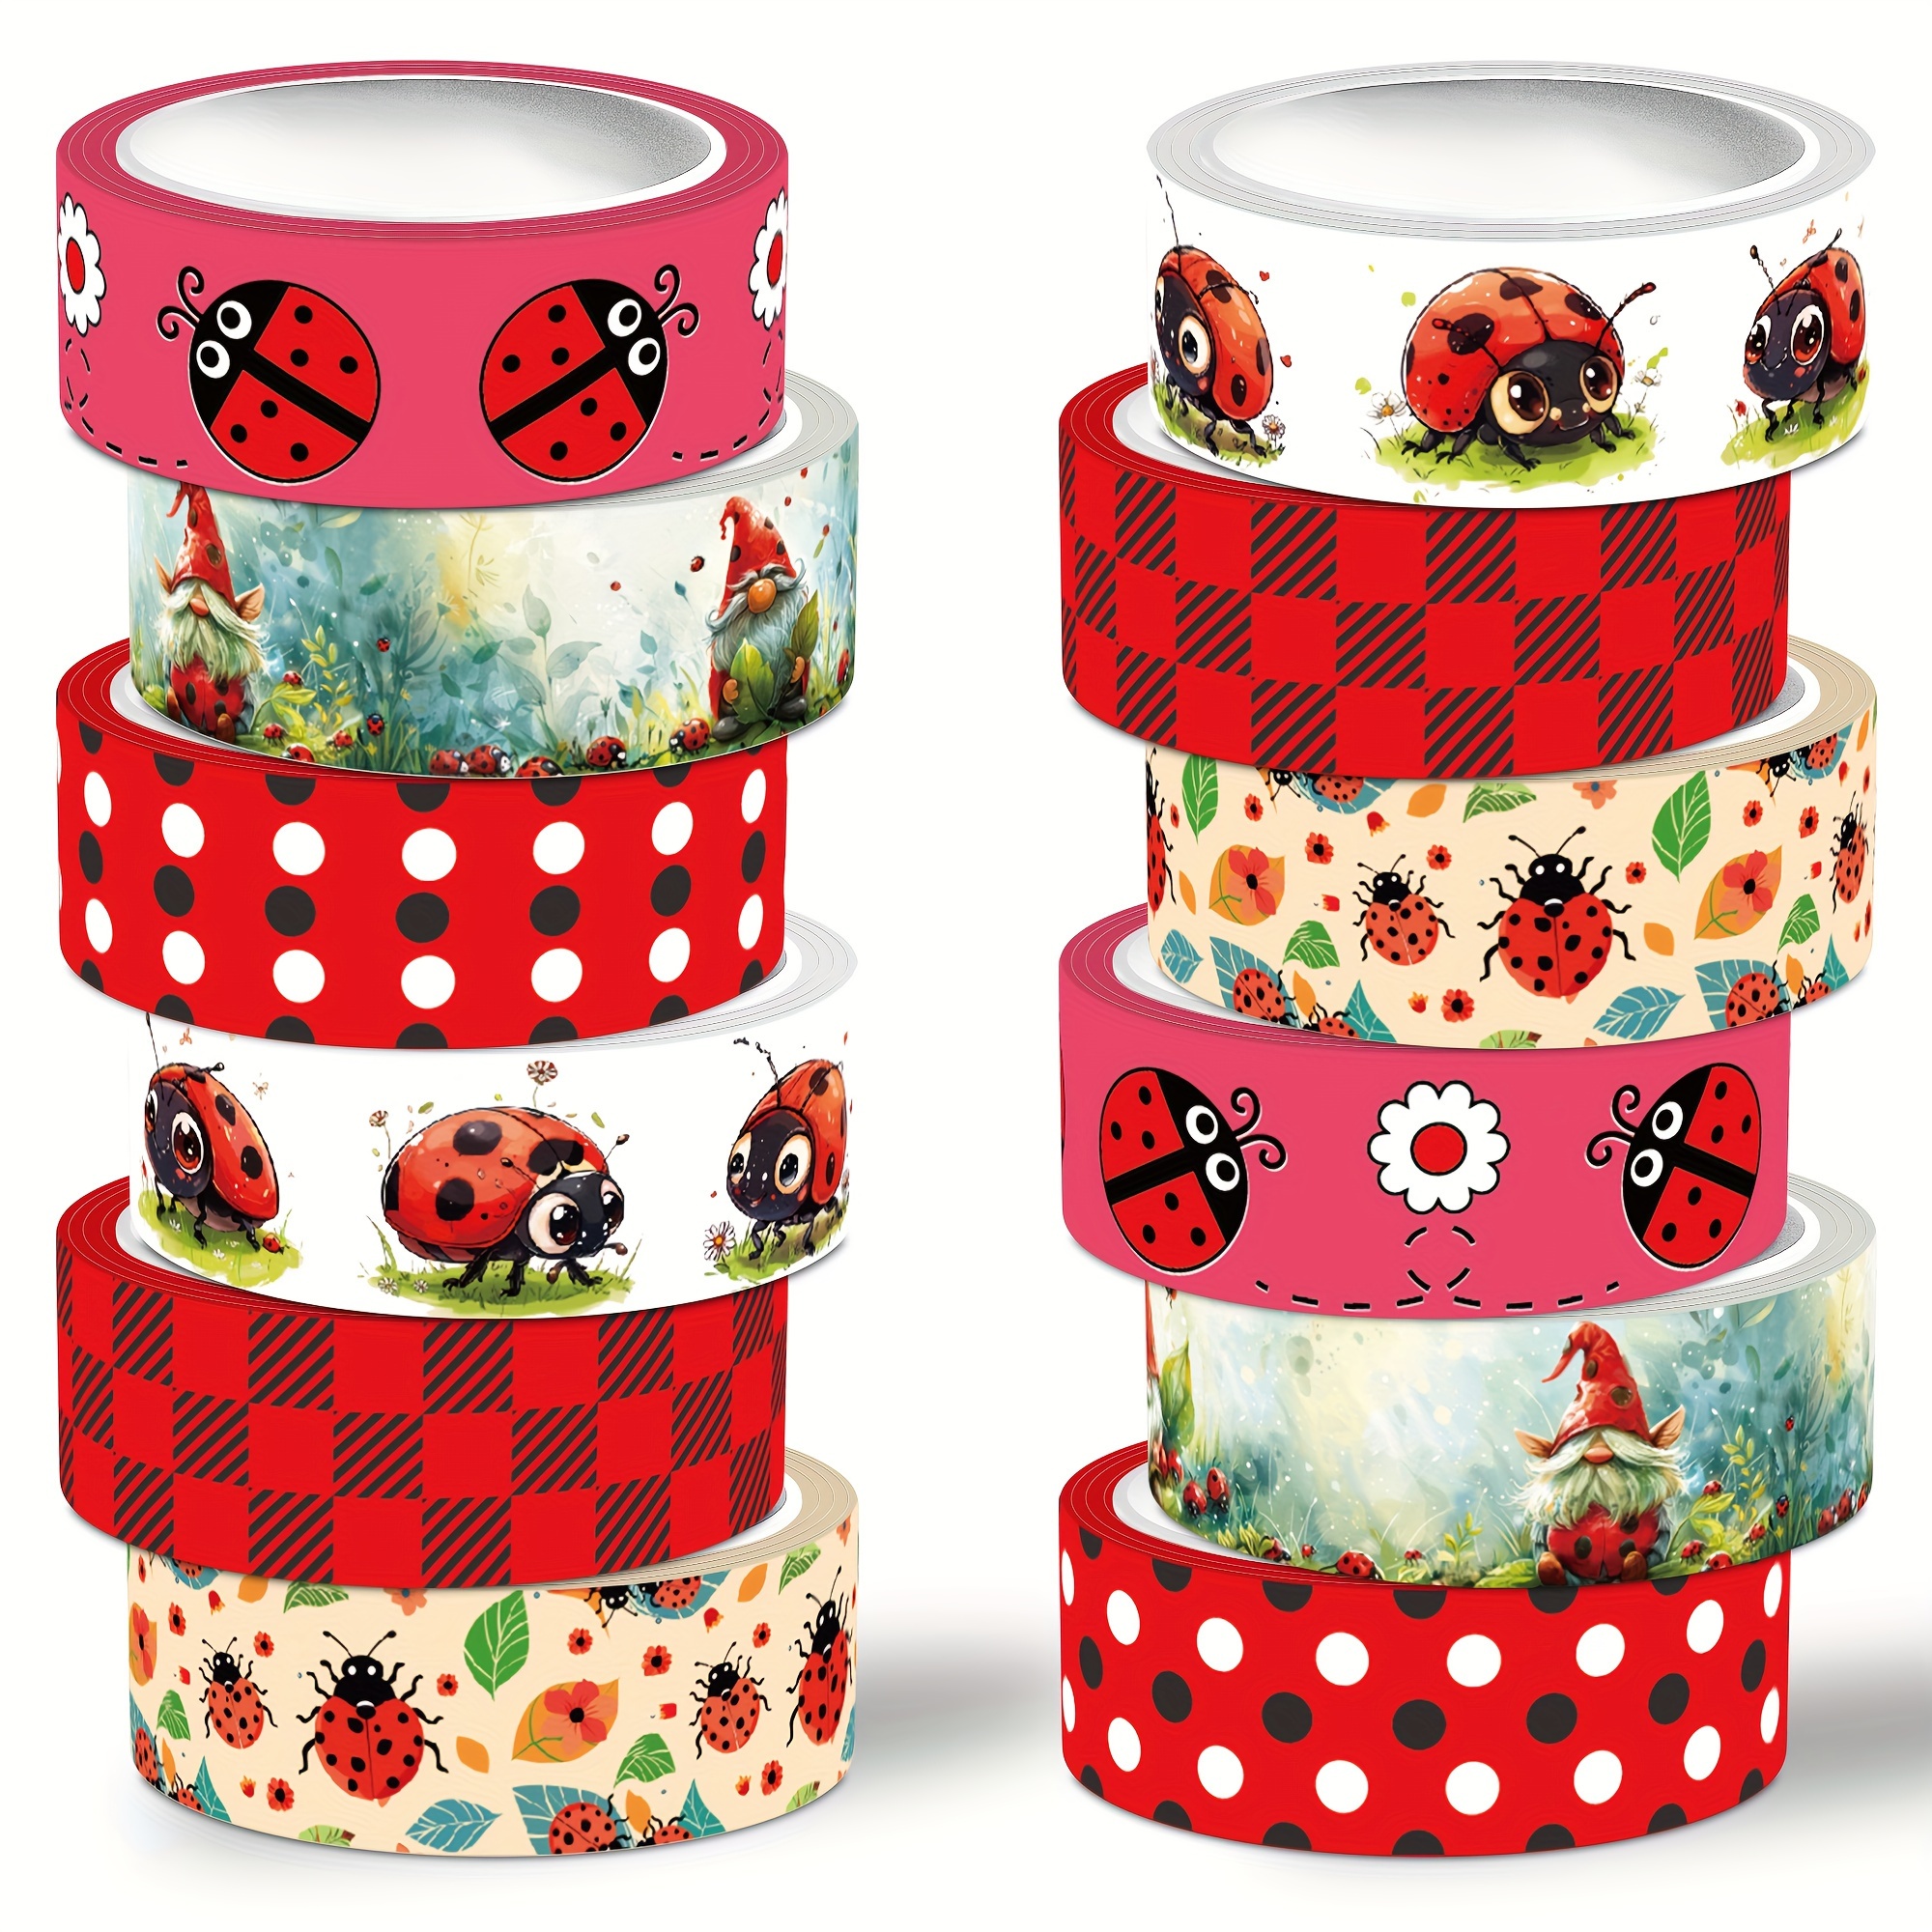 

Nikomie Ladybug-themed Washi Tape Set, 12 Rolls - Red Decorative Paper Tape For Scrapbooking, Diy Crafts & Gift Wrapping